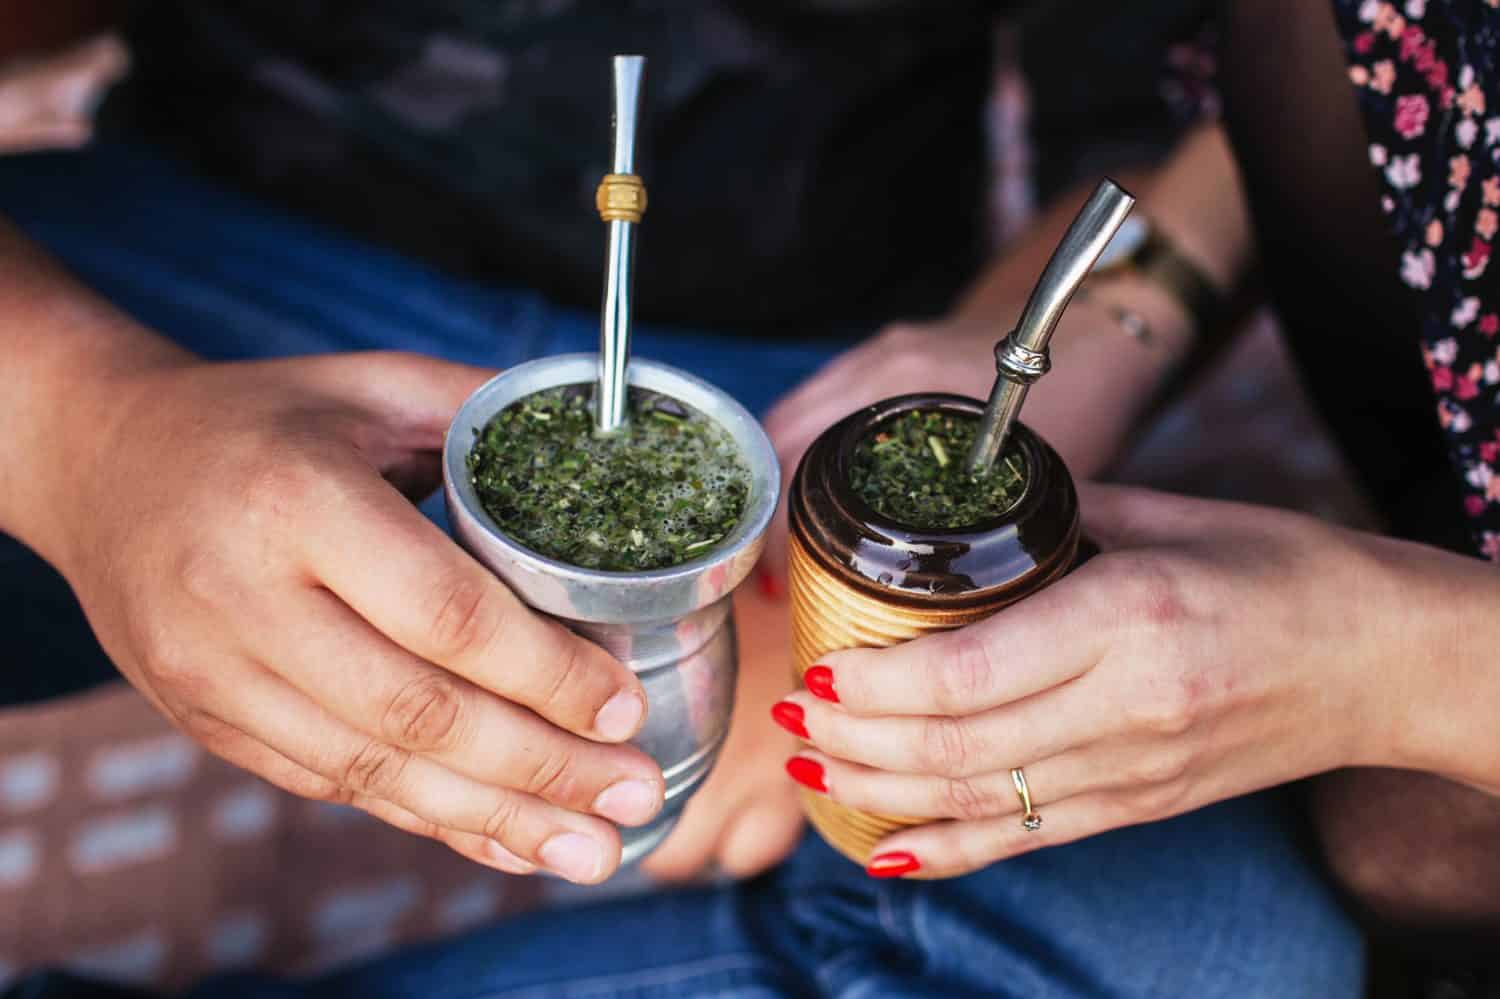 Yerba mate tea in bombilla. Special metal straw. Sout America popular hot drink. Couple drinking healthy herbal beverage. Engagement outdoor picnic.